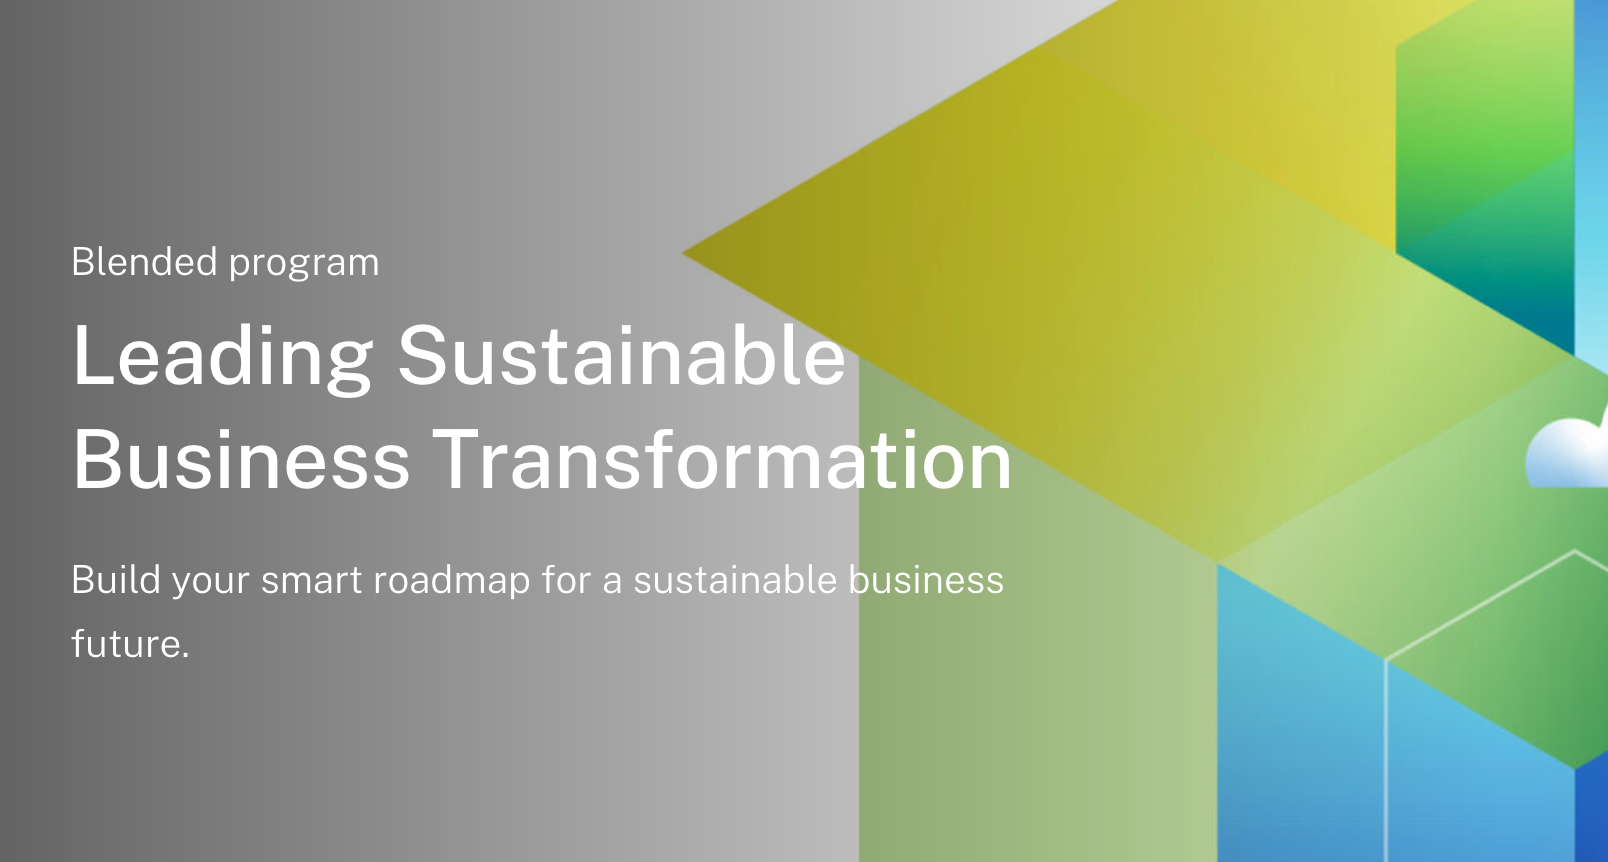 Sustainability certificate: Leading Sustainable Business Transformation